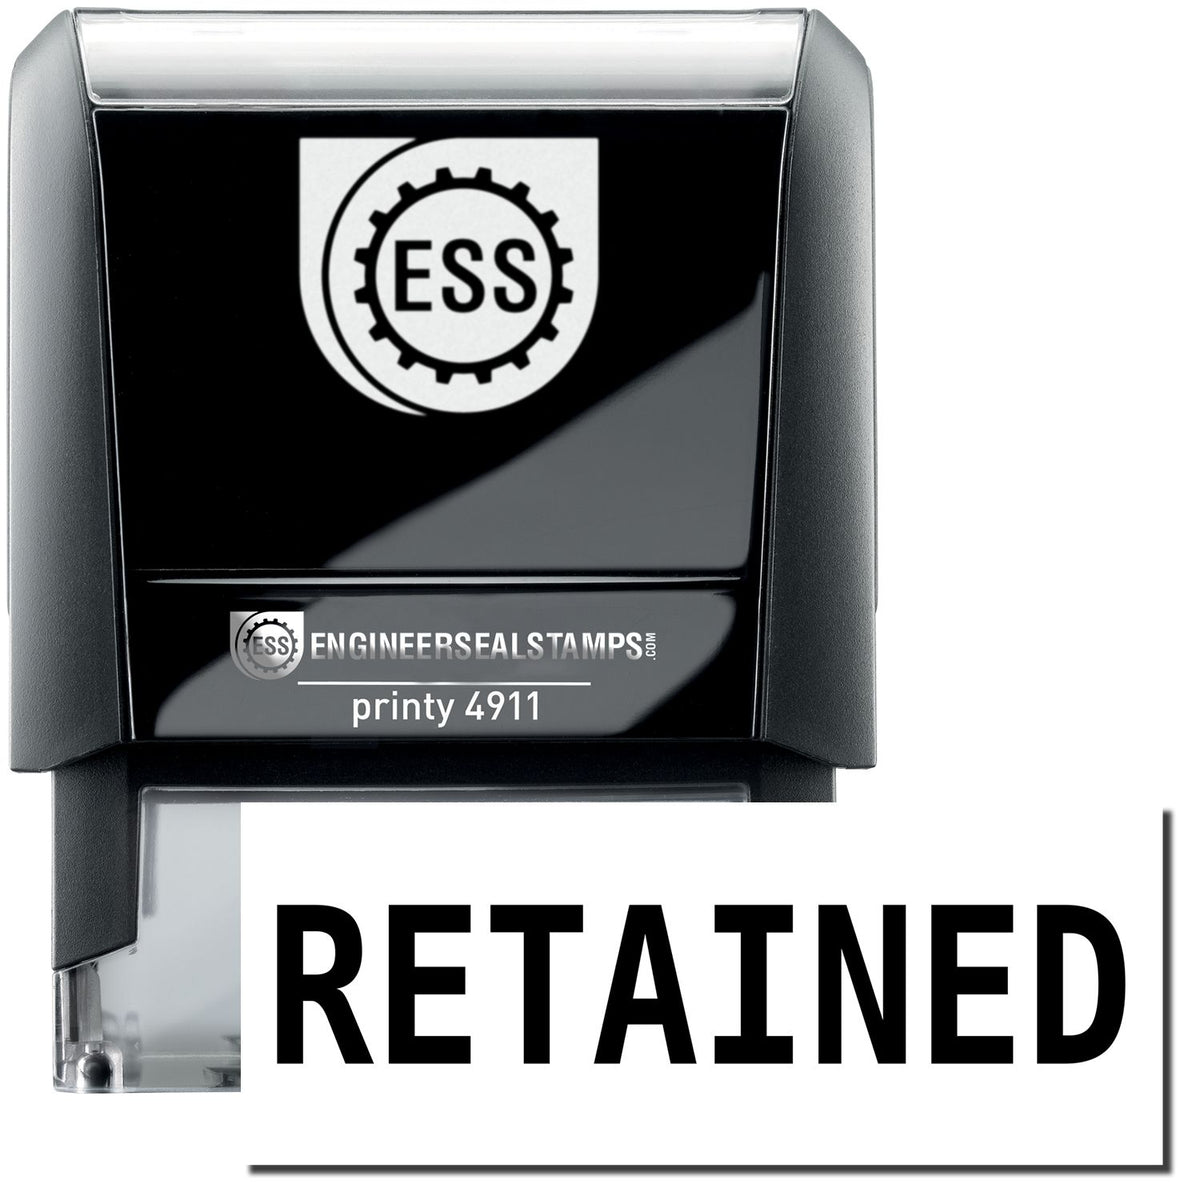 A self-inking stamp with a stamped image showing how the text &quot;RETAINED&quot; is displayed after stamping.